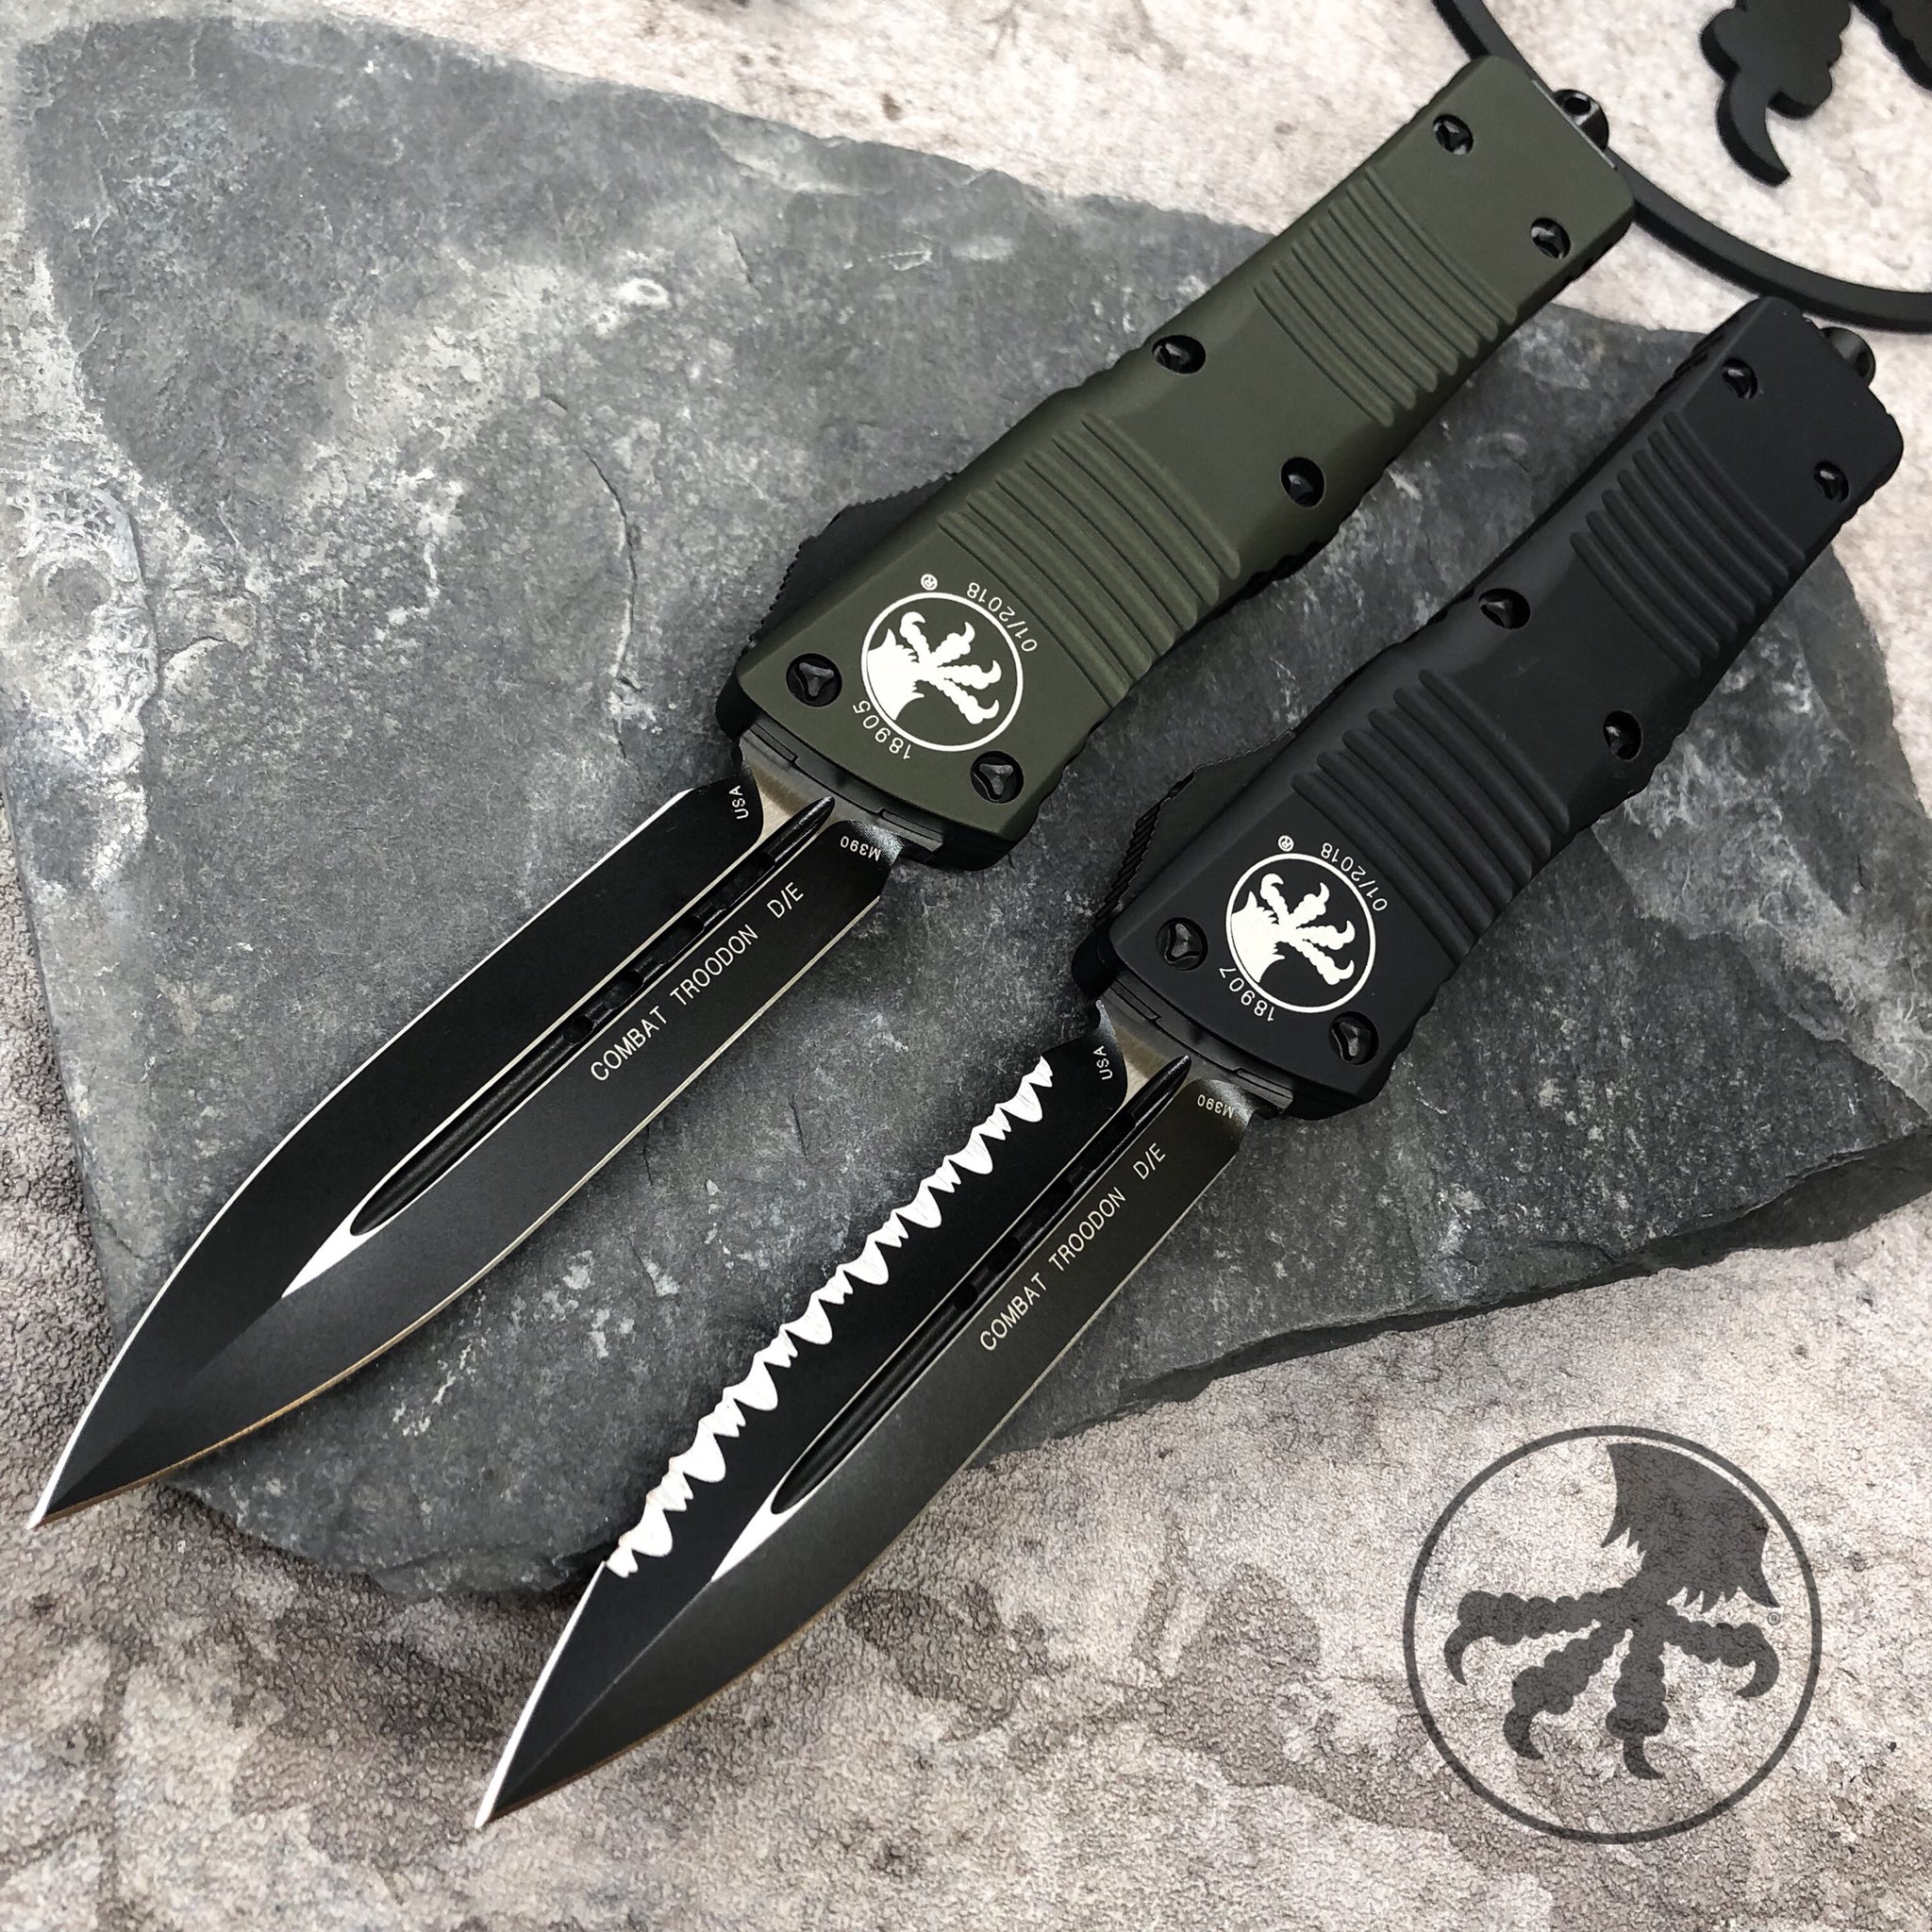 Microtech combat. Microtech Combat Troodon. Нож Microtech Combat Troodon. Microtech Combat Troodon 00556. Microtech Combat Troodon Bowie.